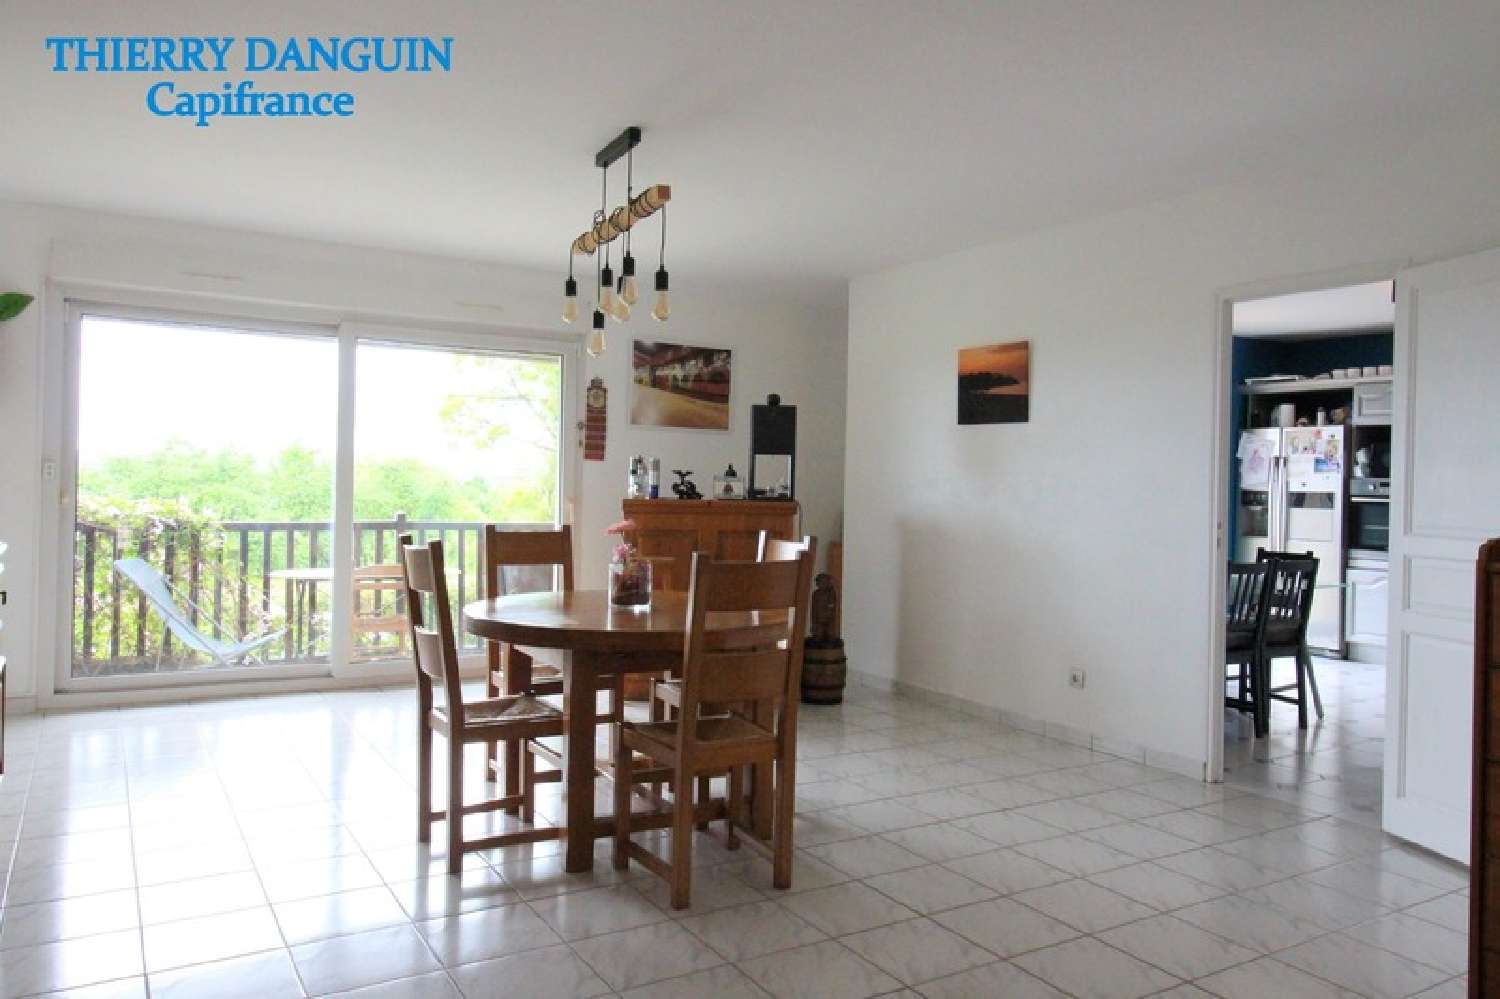  for sale house Meulan Yvelines 4